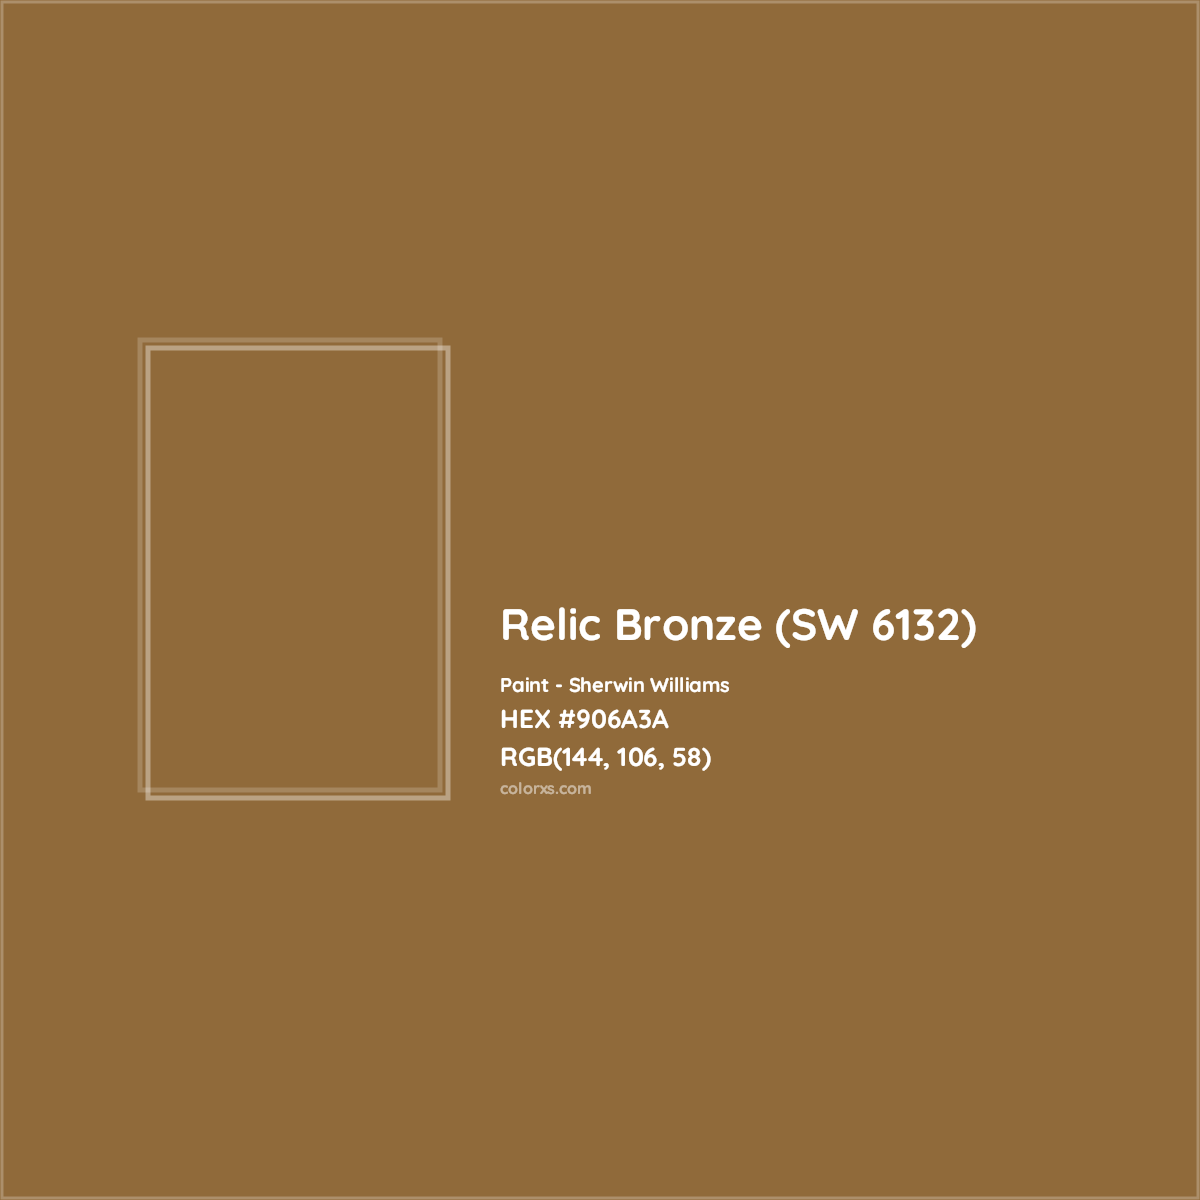 HEX #906A3A Relic Bronze (SW 6132) Paint Sherwin Williams - Color Code